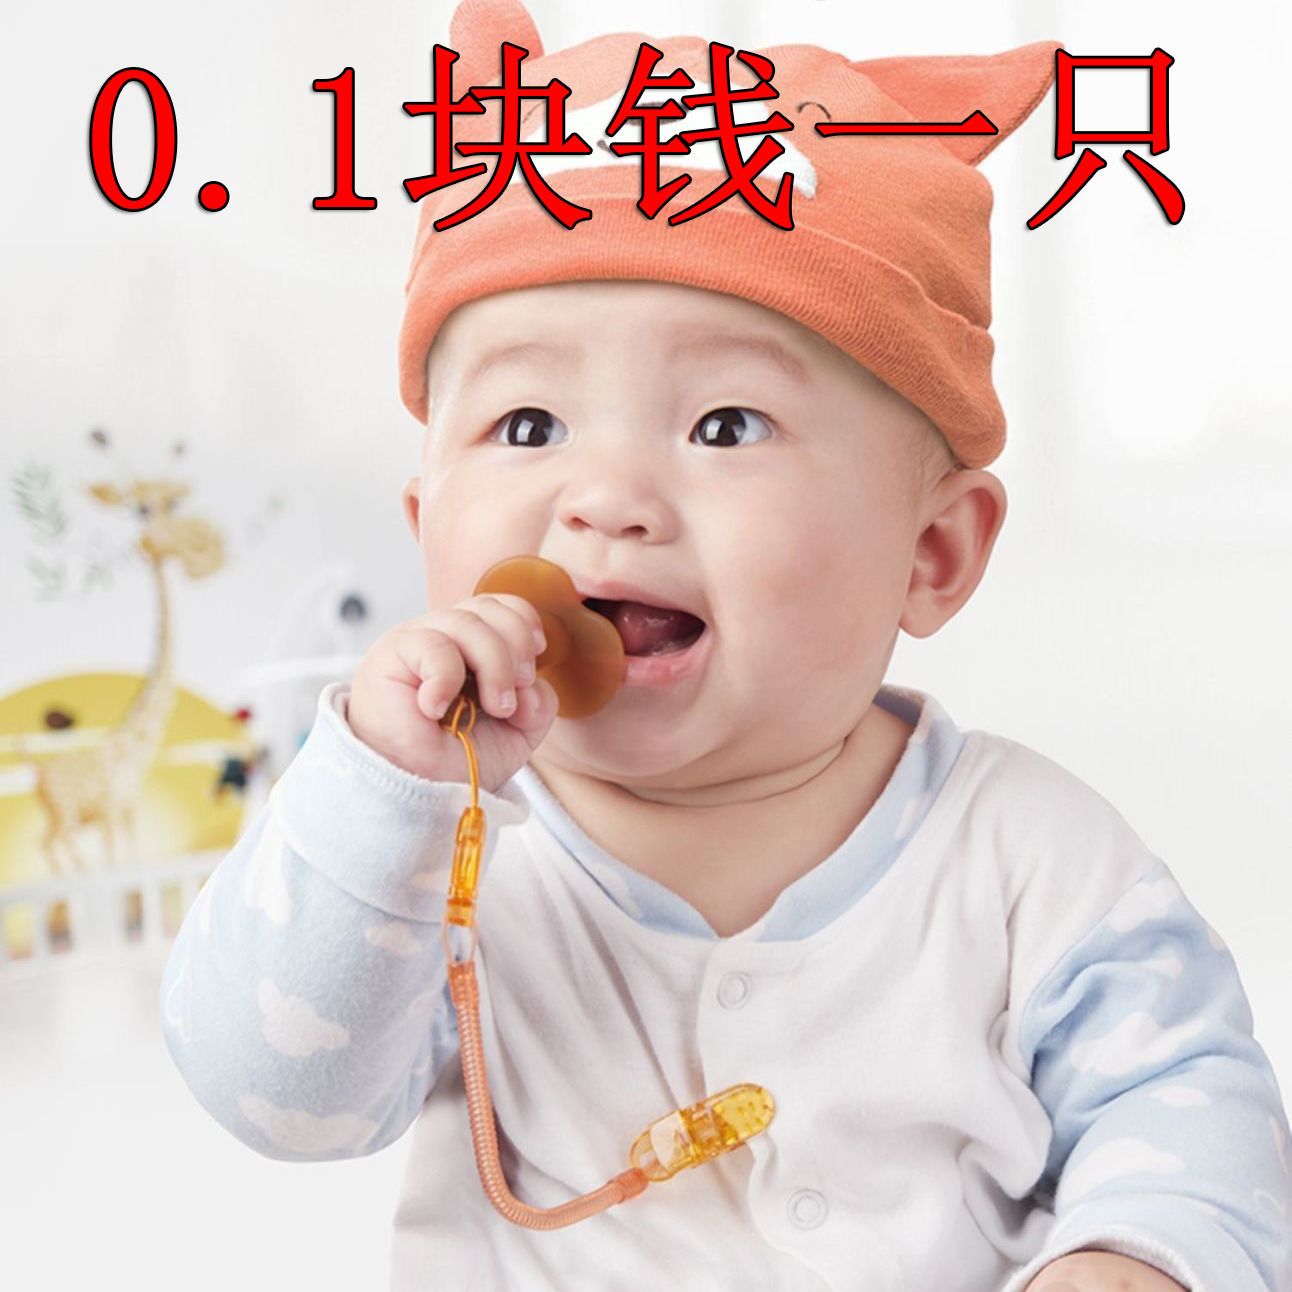 Molar Rod Baby Teether Silicone Toy Baby Munchkin Soothing Chews Prevent Hand Sucking Water Boiling Suitable Soothing Food Grade